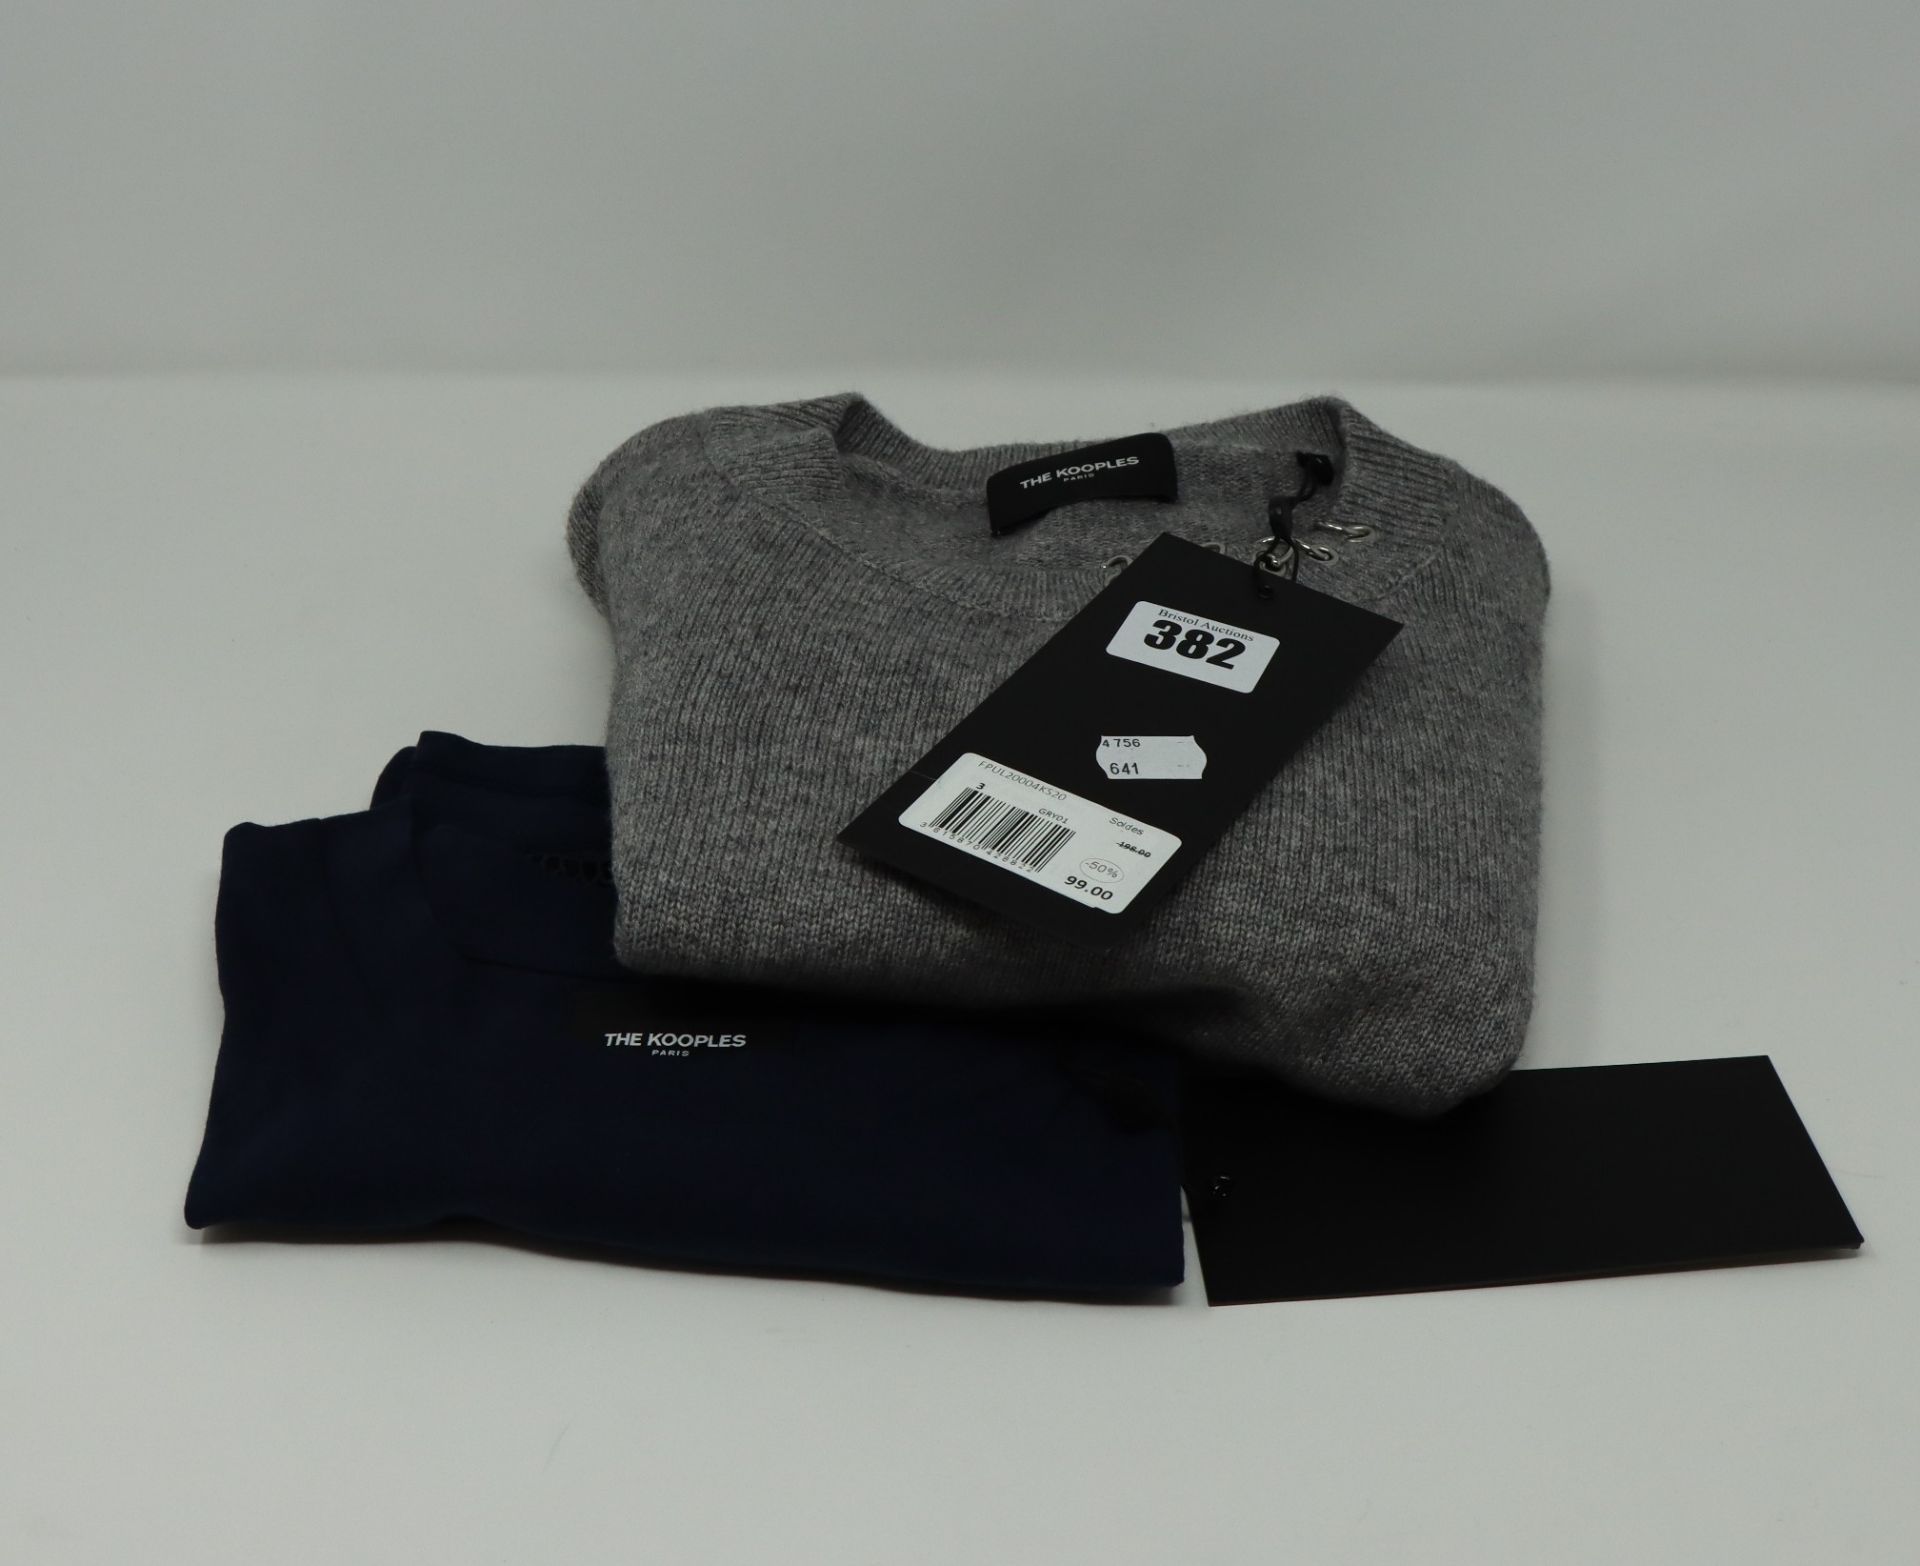 One as new Kooples Knit-&-Moon Knitwear grey Sweater size 3. One as new Kooples navy t-shirt with